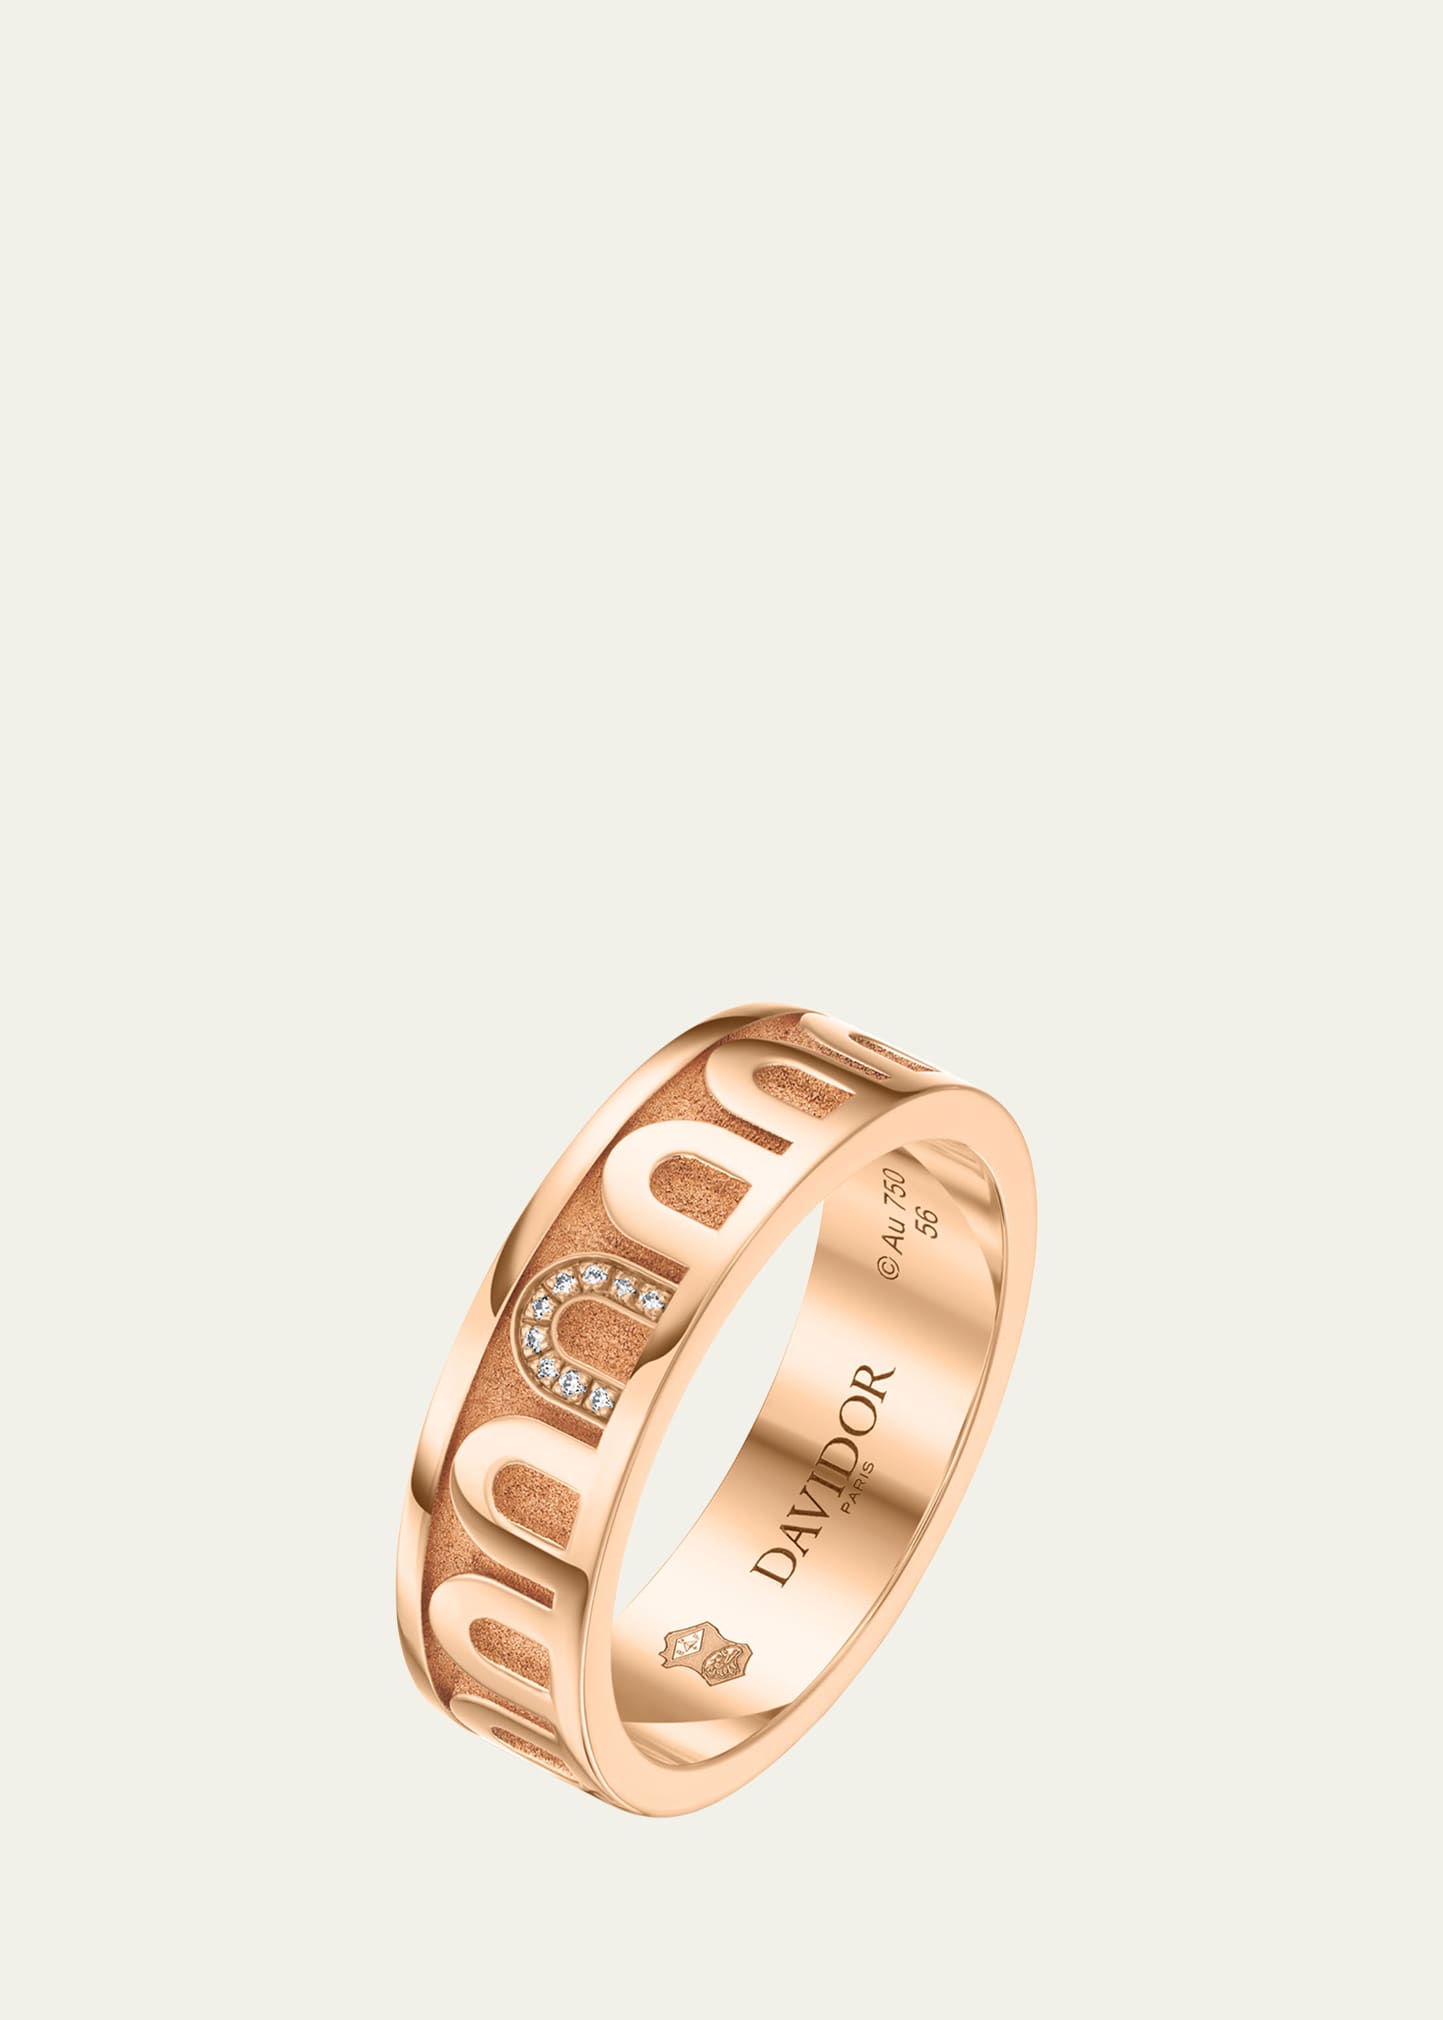 Davidor L'arc De  Ring Mm In 18k Rose Gold With Satin Finish And Porta Simple Diamonds